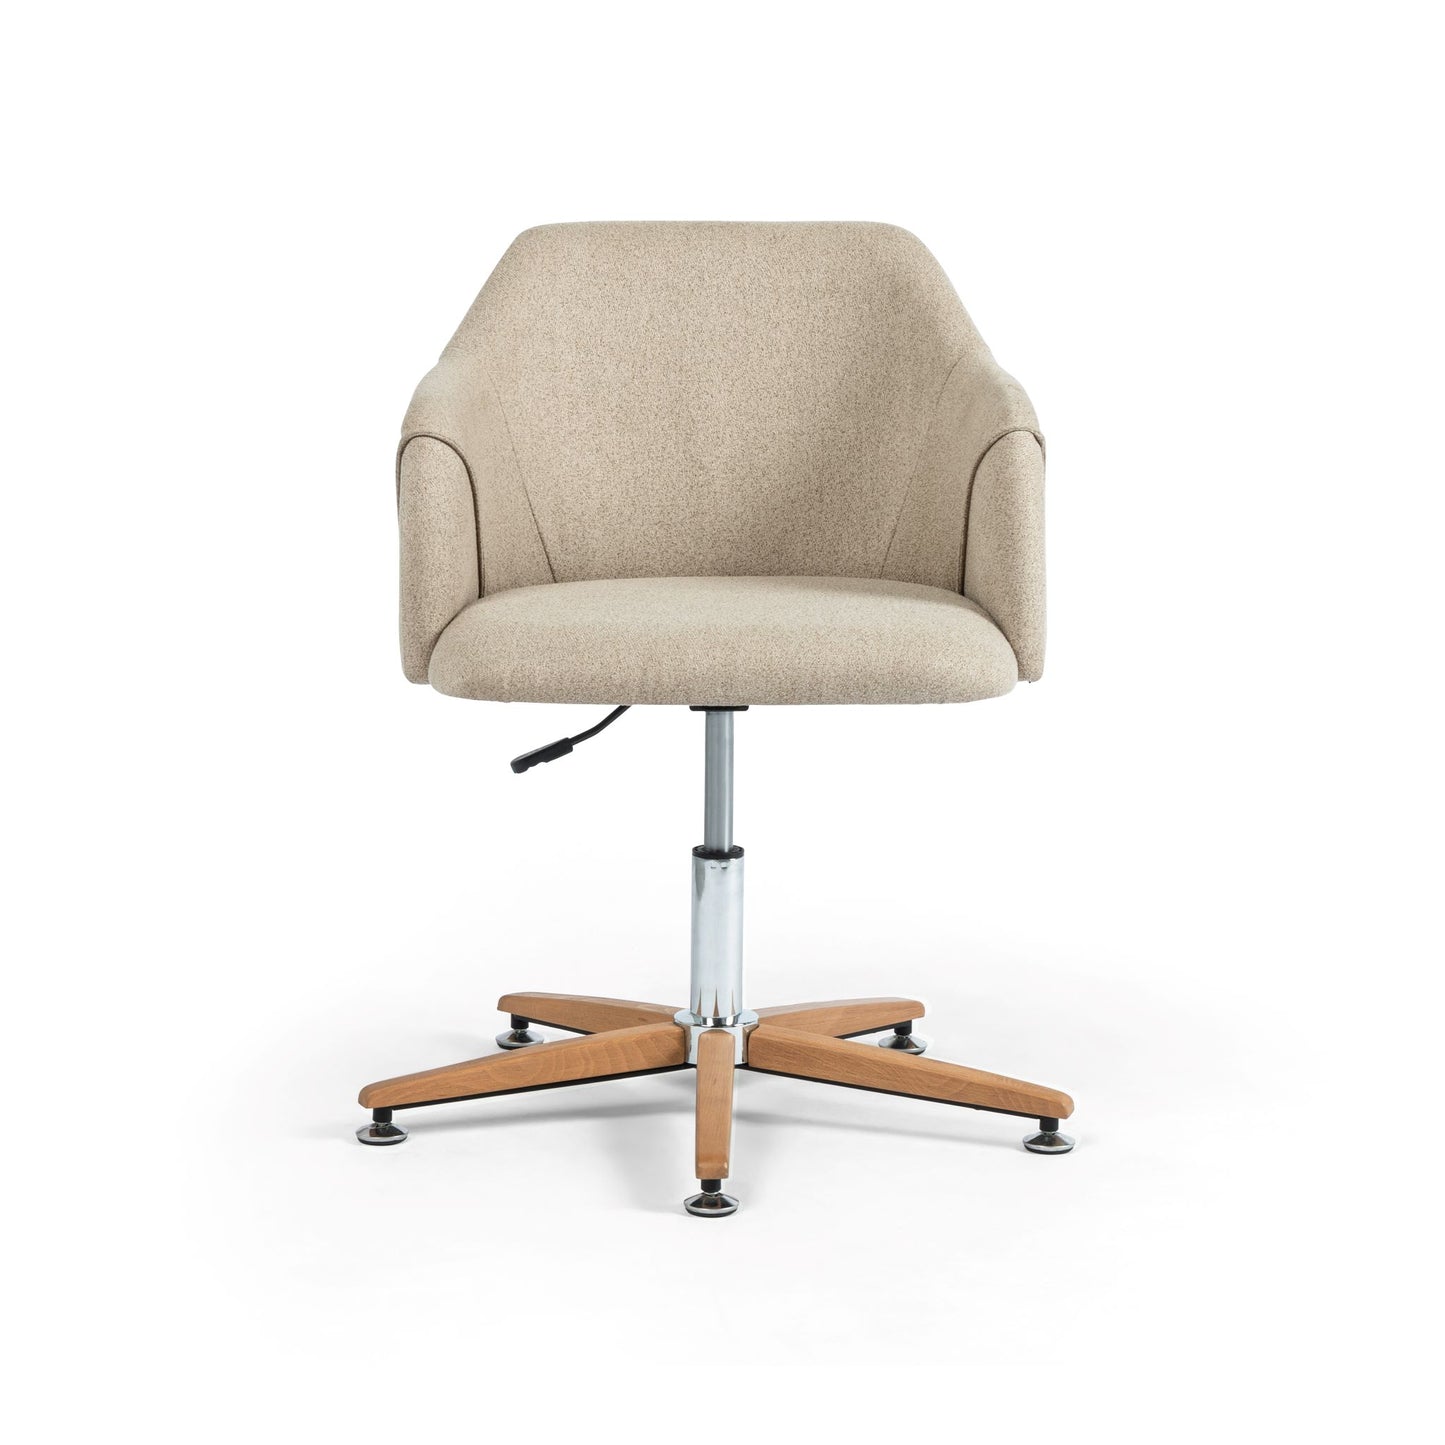 Load image into Gallery viewer, Edna Desk Chair-Fedora Oatmeal Office Chairs Four Hands     Four Hands, Burke Decor, Mid Century Modern Furniture, Old Bones Furniture Company, Old Bones Co, Modern Mid Century, Designer Furniture, https://www.oldbonesco.com/
